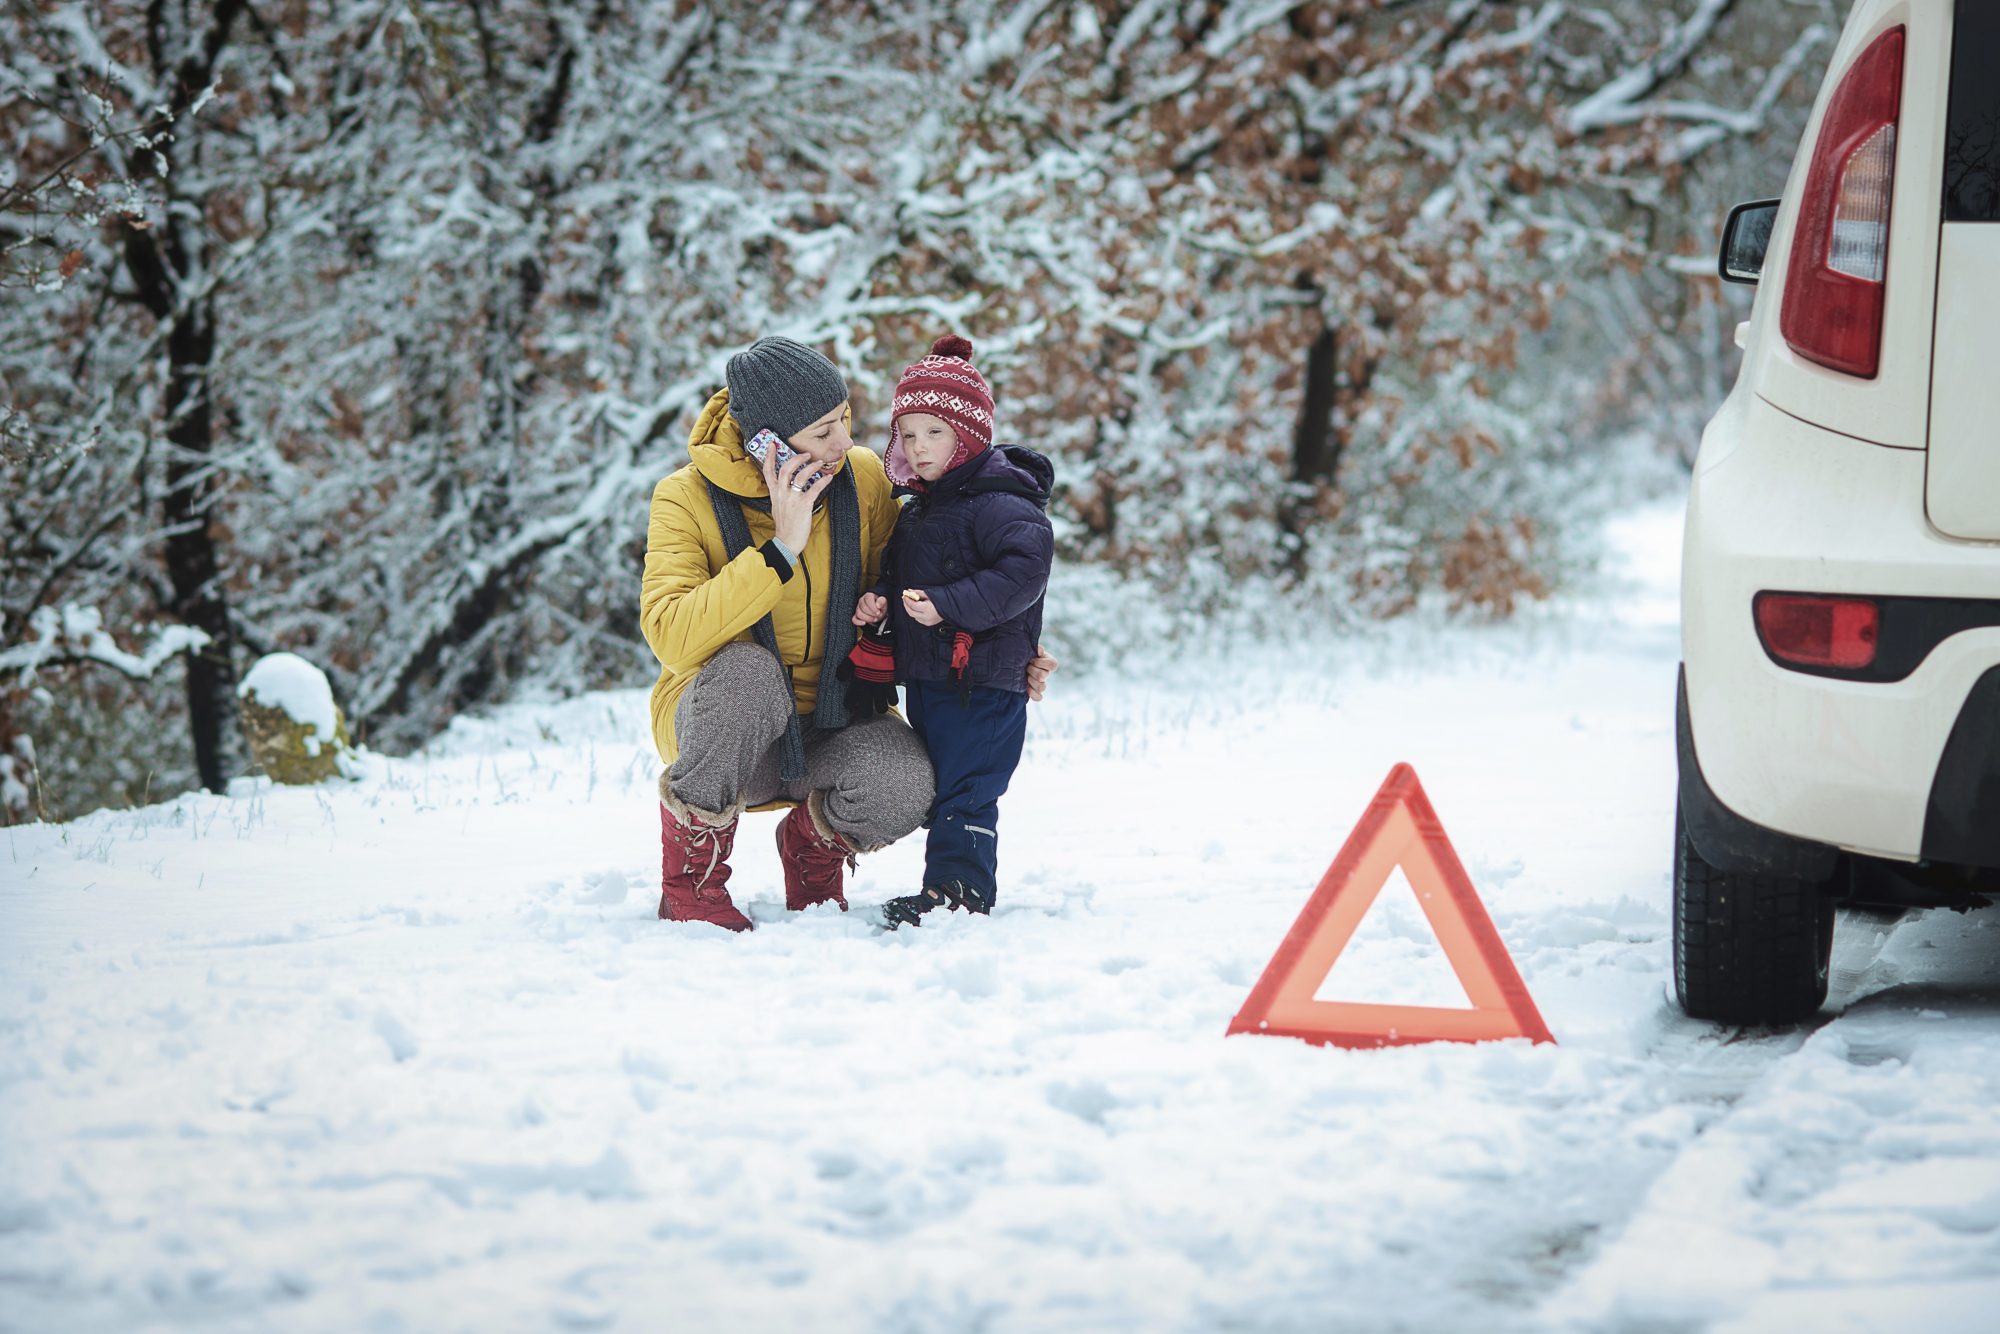 A woman with a child on the winter road. emergency sign. Skiers Face Winterisation and Ski Rack Charges Adding up to £179 On Car Hire Bill.  Photo: iCarhireinsurance.com